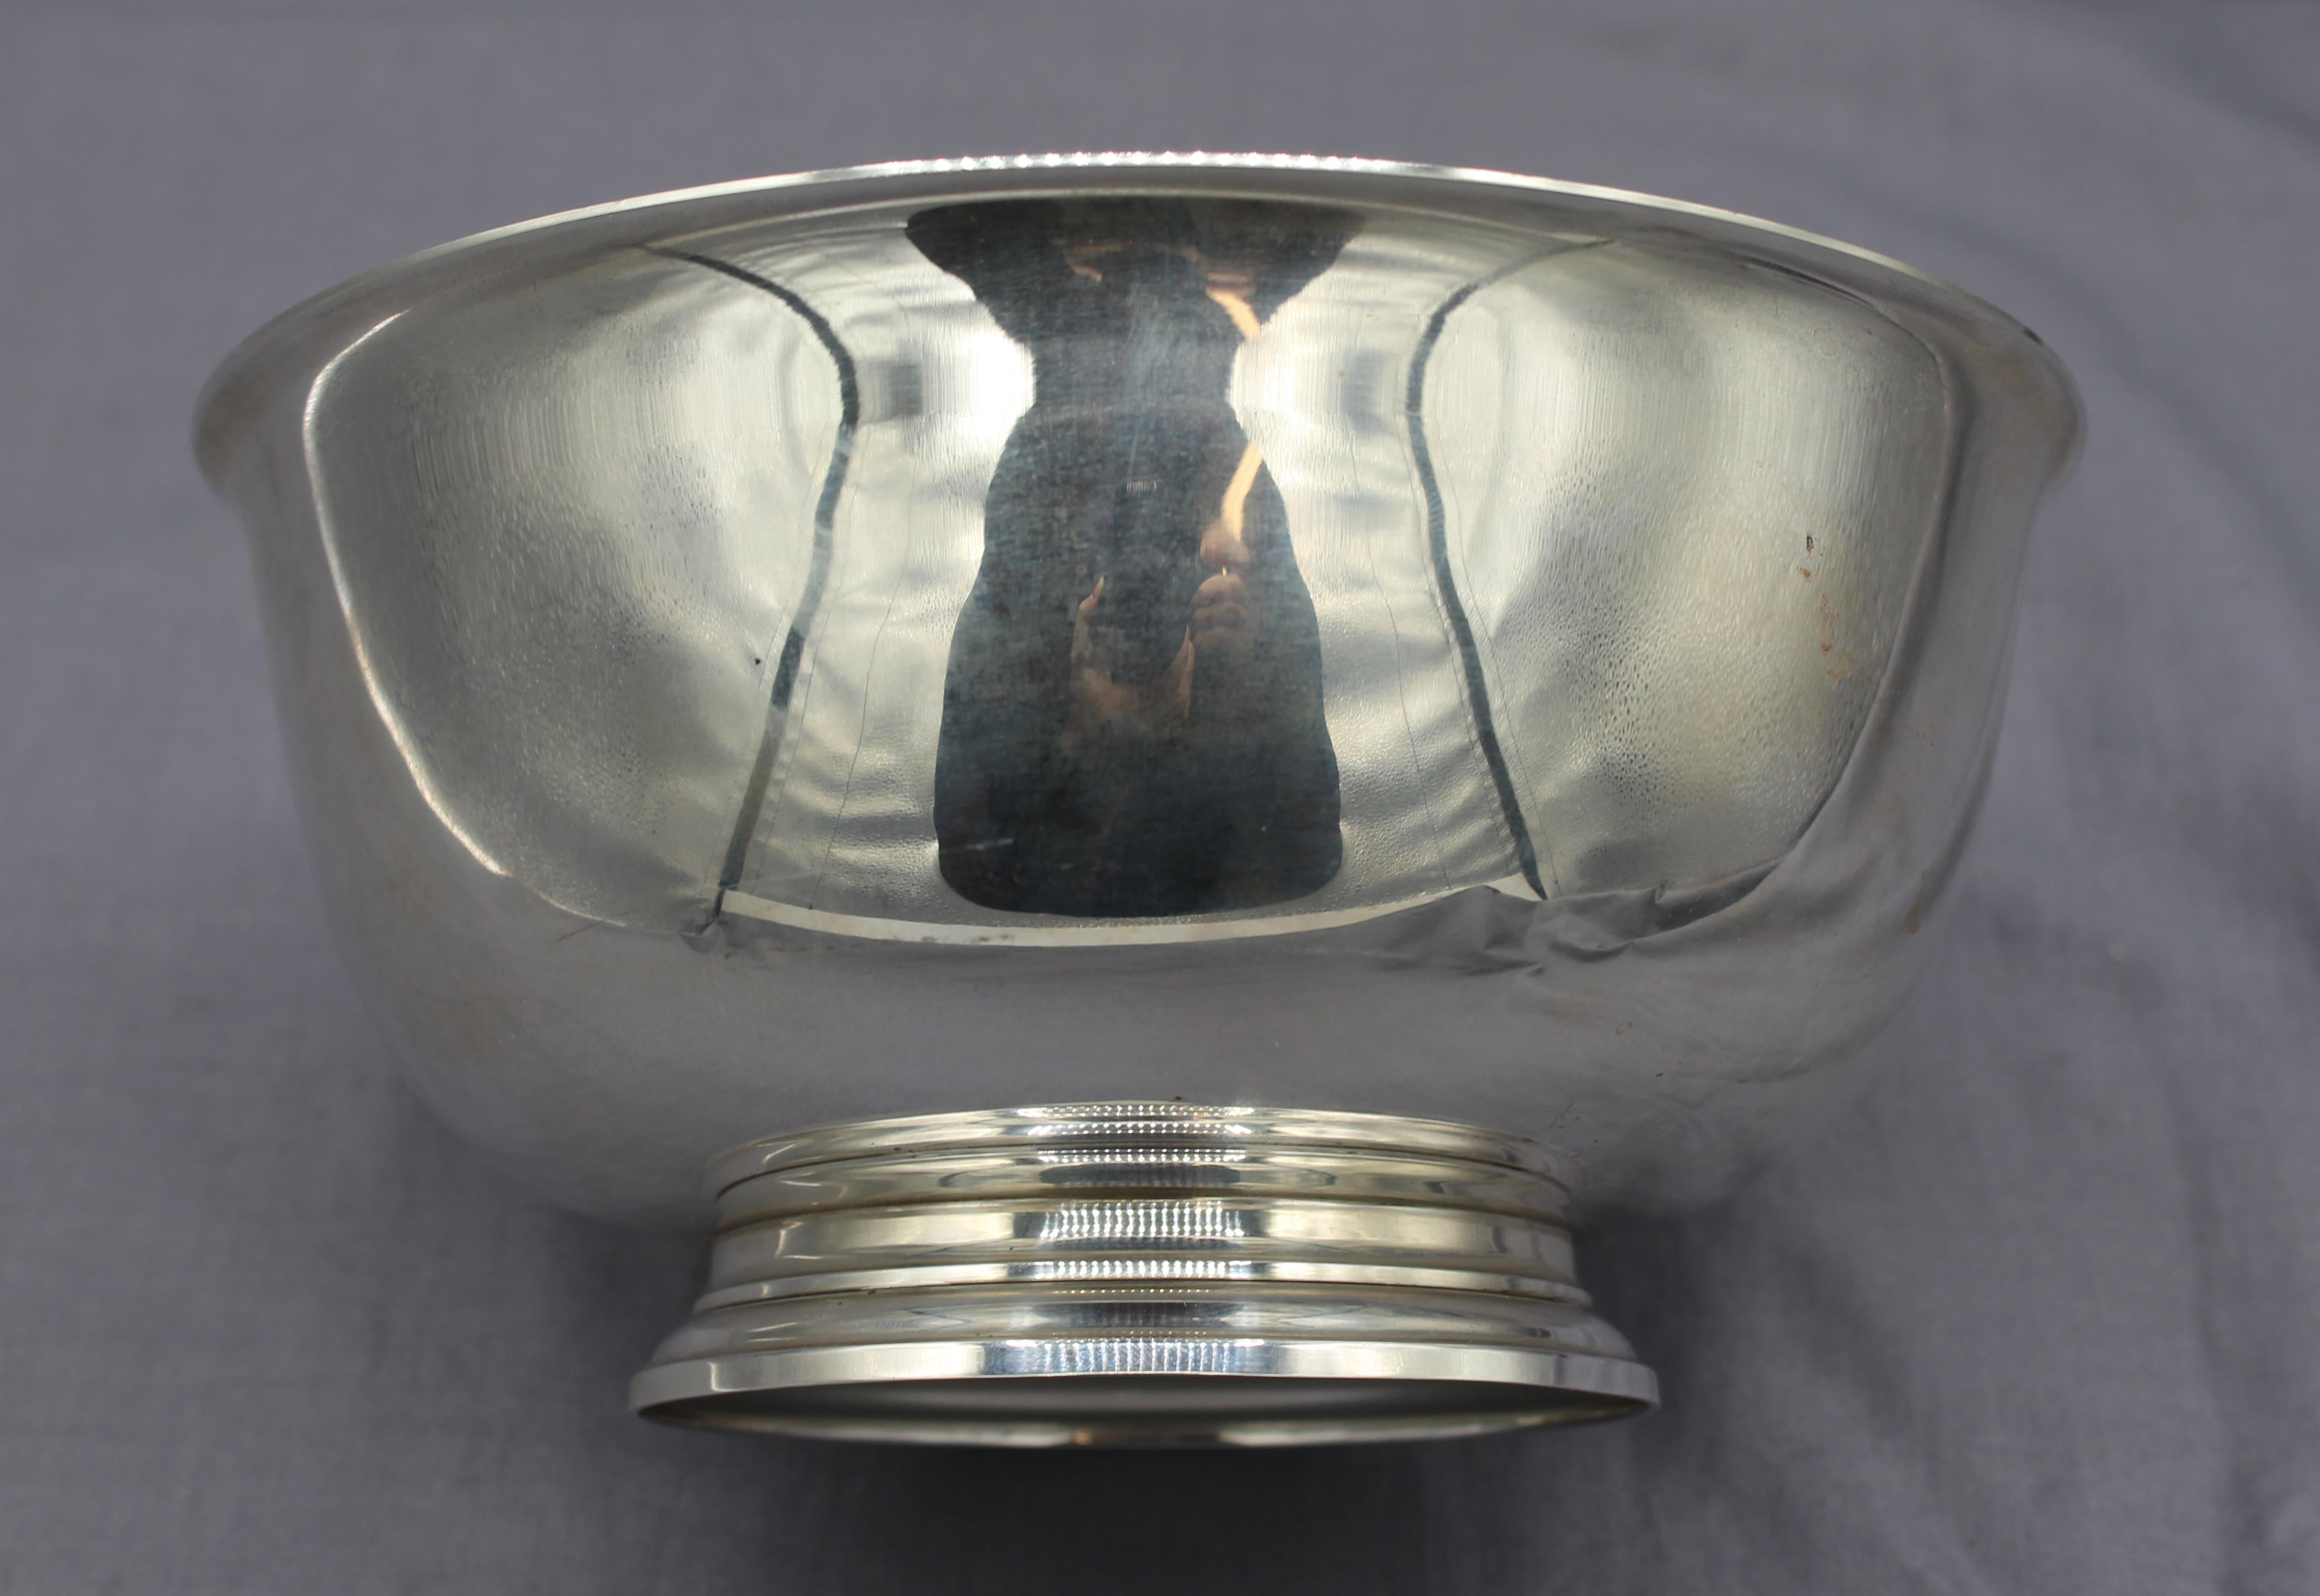 Modernism sterling silver bowl by Tiffany of good size. Vintage. Round stepped base. Marked: Tiffany & Co. Makers Sterling Silver 23616. 12.60 troy oz.
Measures: 6 3/4